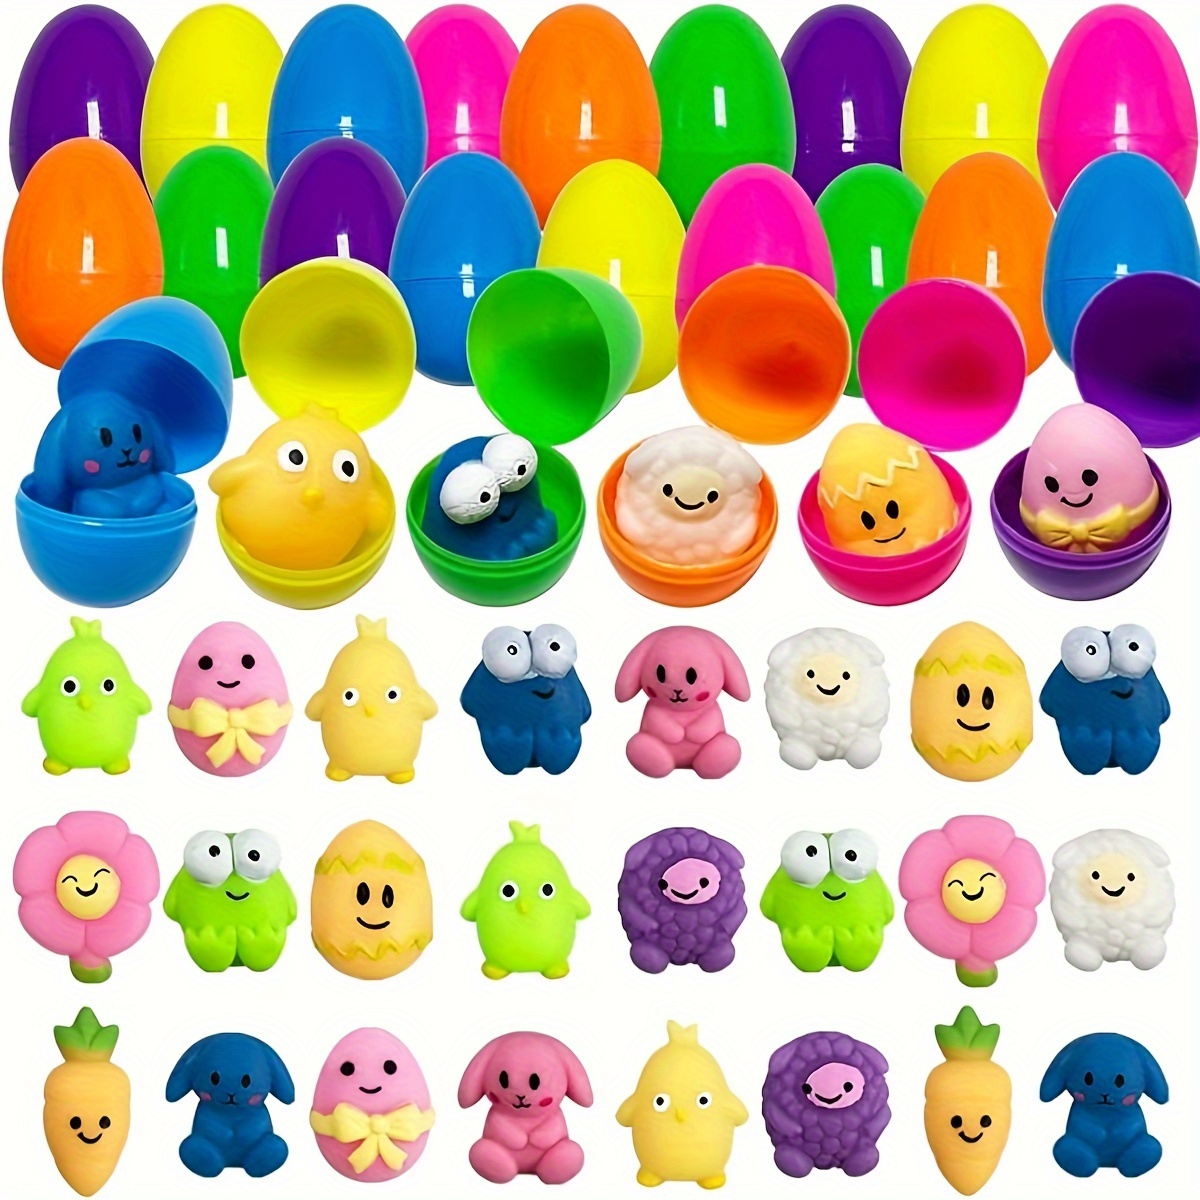 

6pcs/12pcs/24pcs Random Color Plastic Prefilled Easter Eggs With Easter Mochi Squishy Toys Inside, Easter Basket Stuffers, Easter Egg Fillers, Toys For Kids, Birthday Gifts, Easter Party Gifts